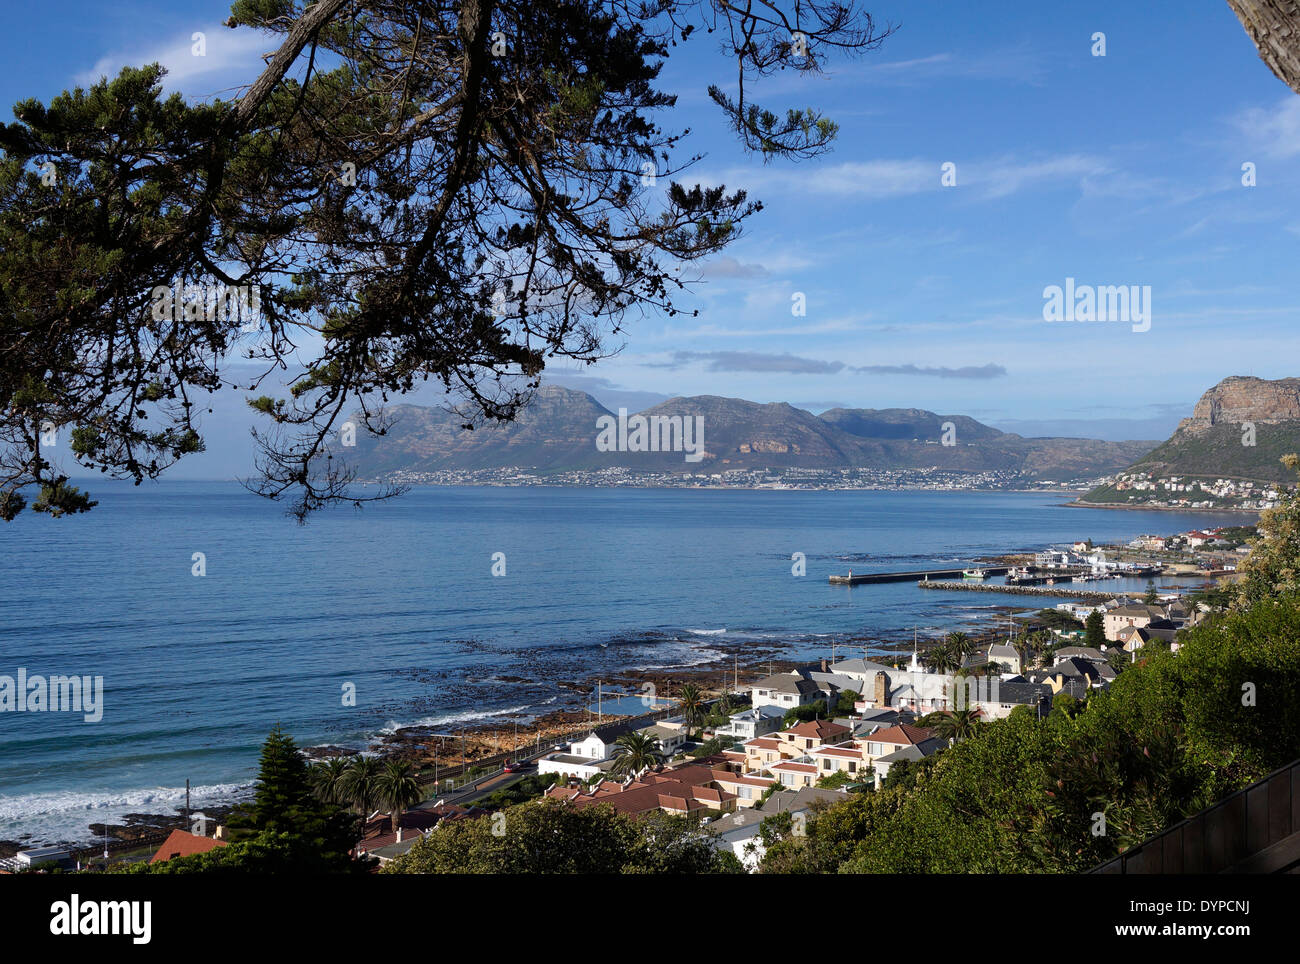 View of Kalk Bay Harbour from Boyes Drive. Stock Photo